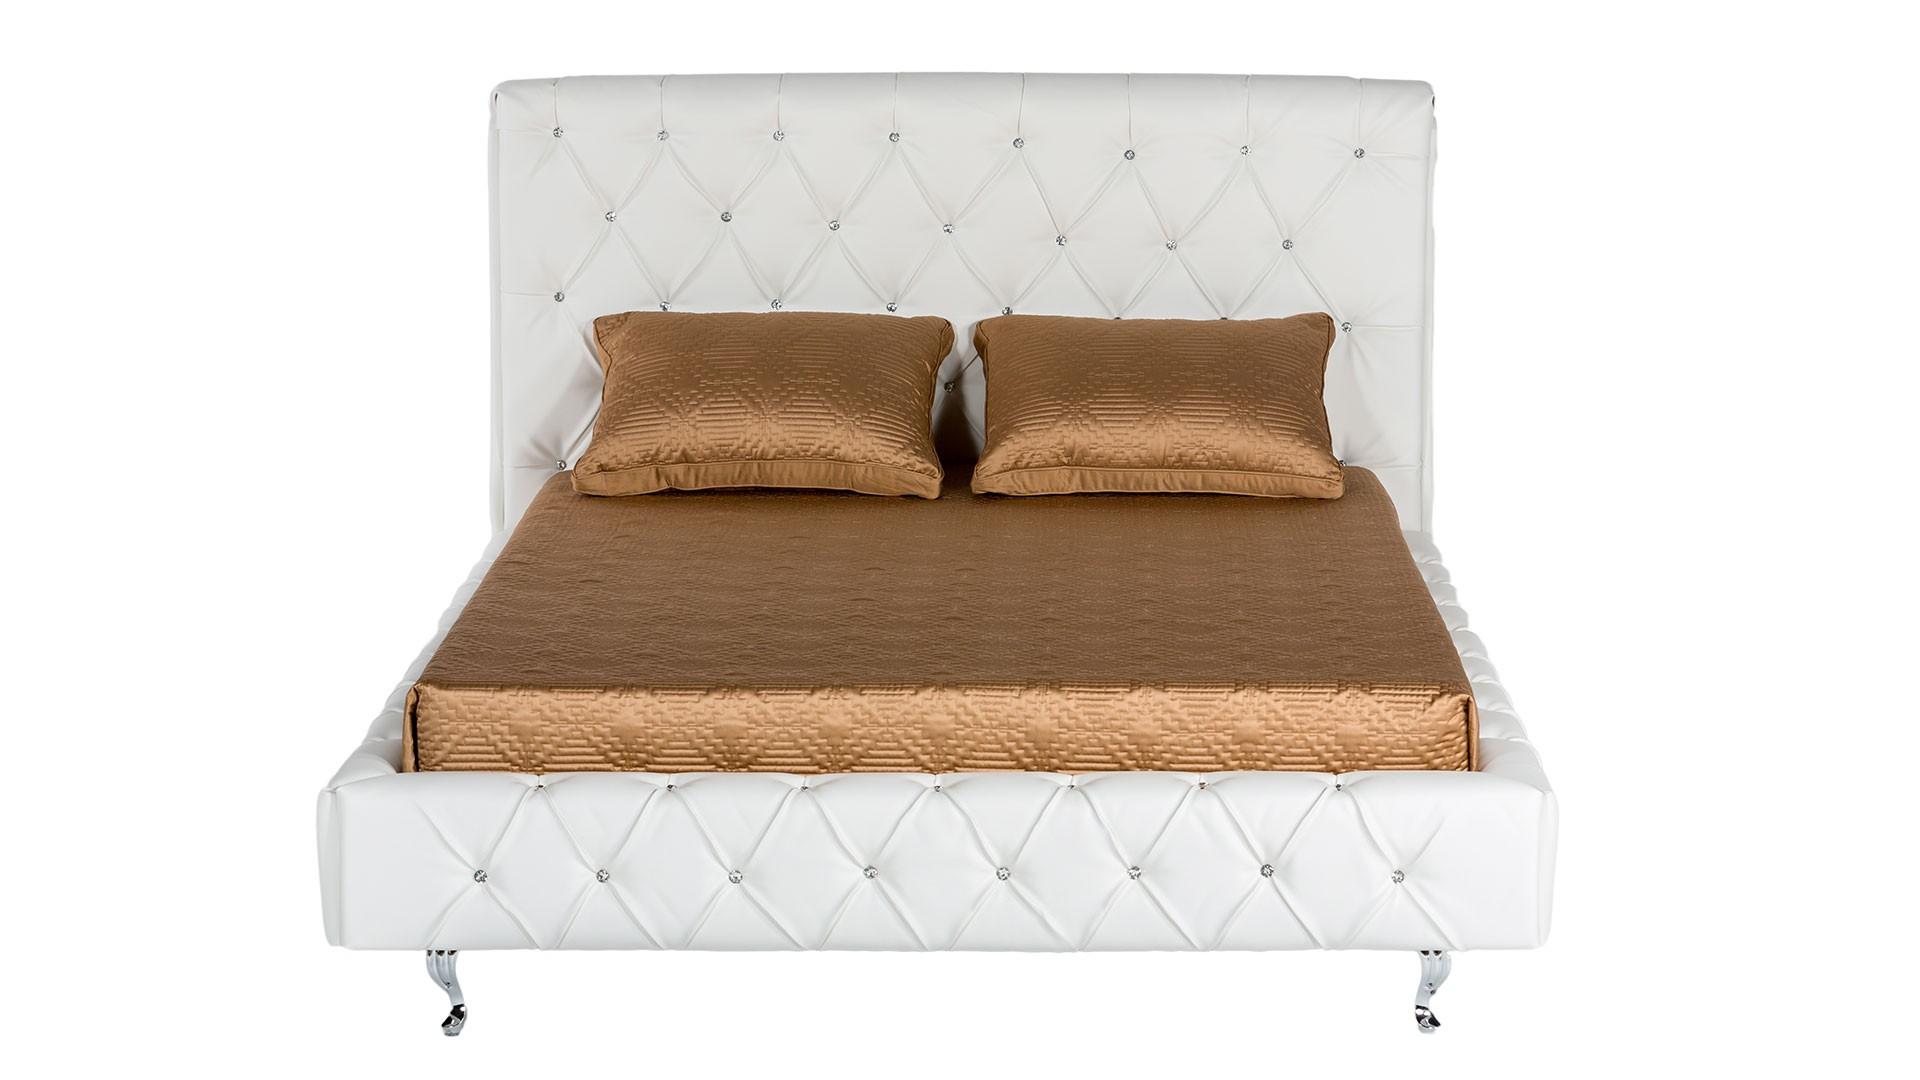 Contemporary Platform Bed Maria AHU-064-WHT-04 in White Leatherette